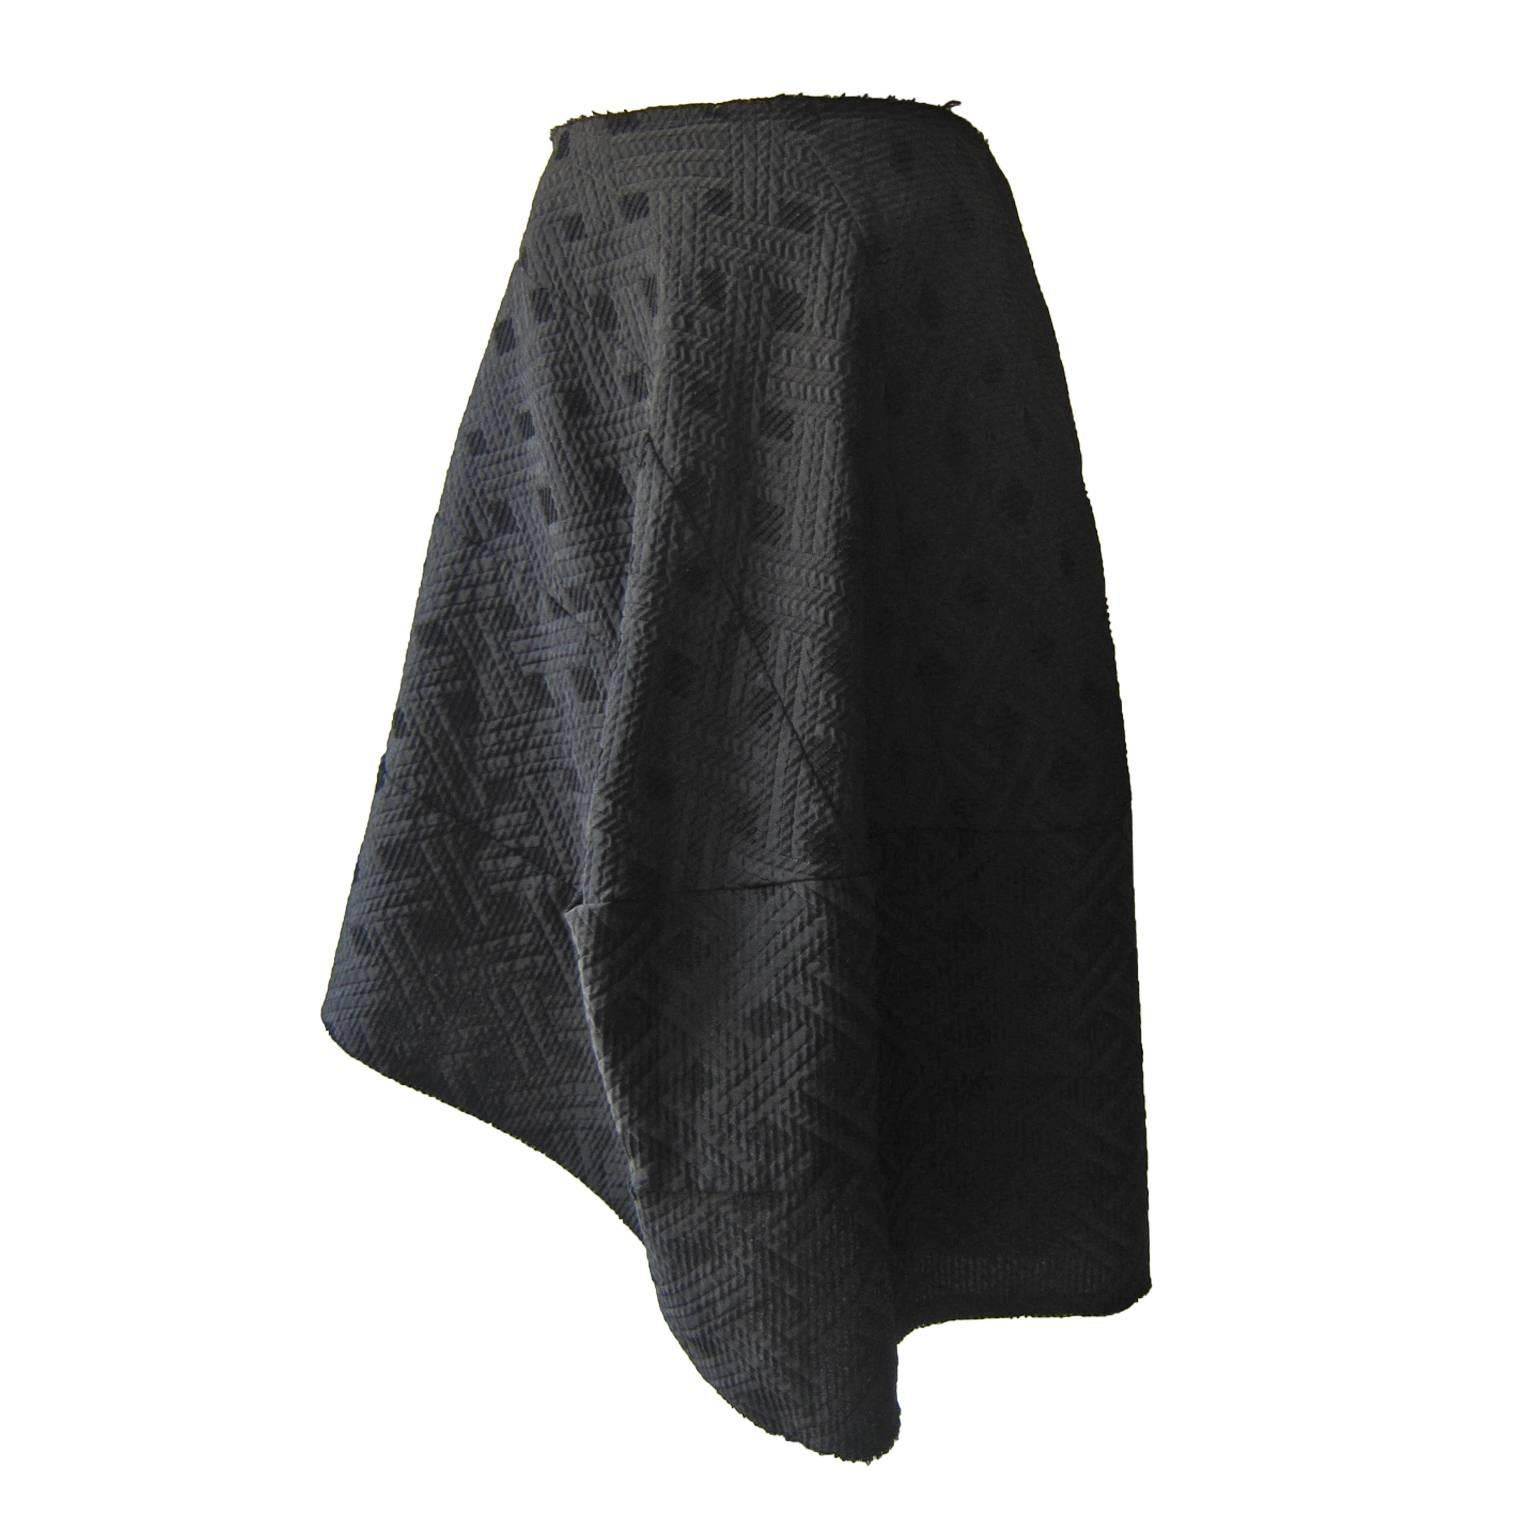 Comme des Garcons asymmetric mixed black fabric skirt from AD 2006.
Raw cut edge, Side zip closure.
Original size : S (it fits like S-M)